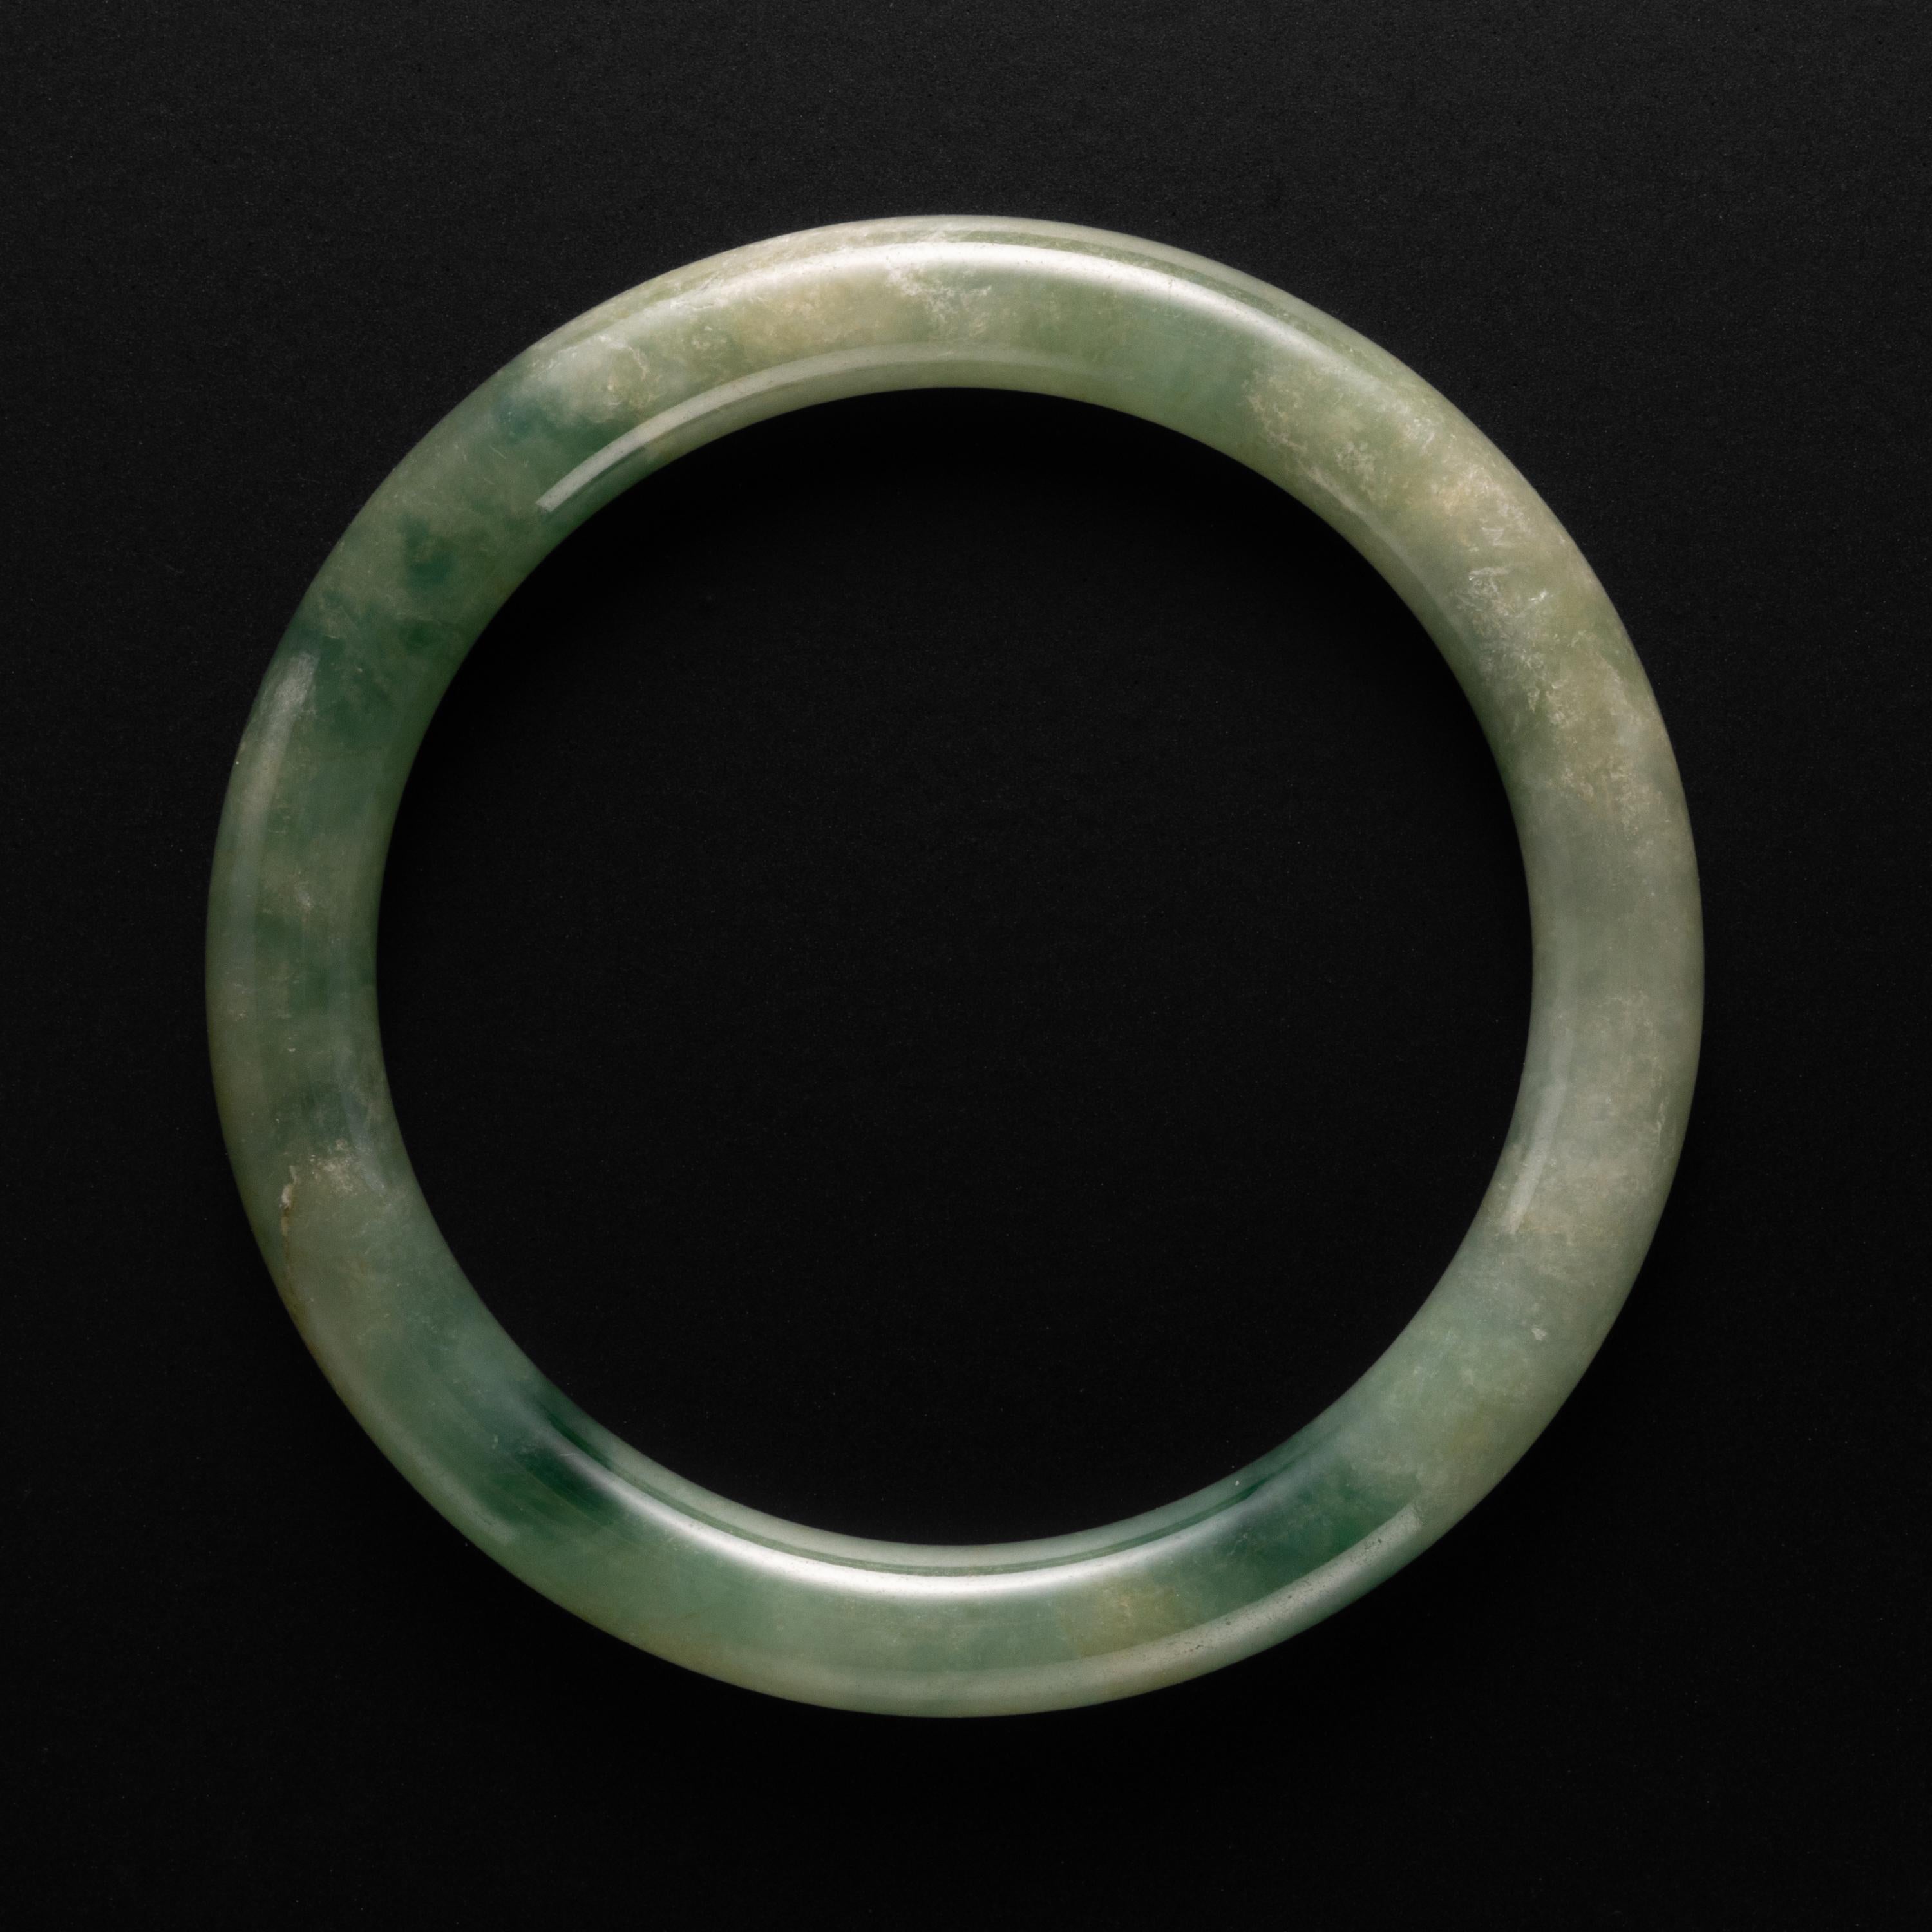 This is a small but utterly gorgeous highly translucent natural and untreated jadeite jade bangle. With an interior diameter of 54mm, this should fit over a smaller to average-sized wrist. 

The lush greens are visually refreshing and because the